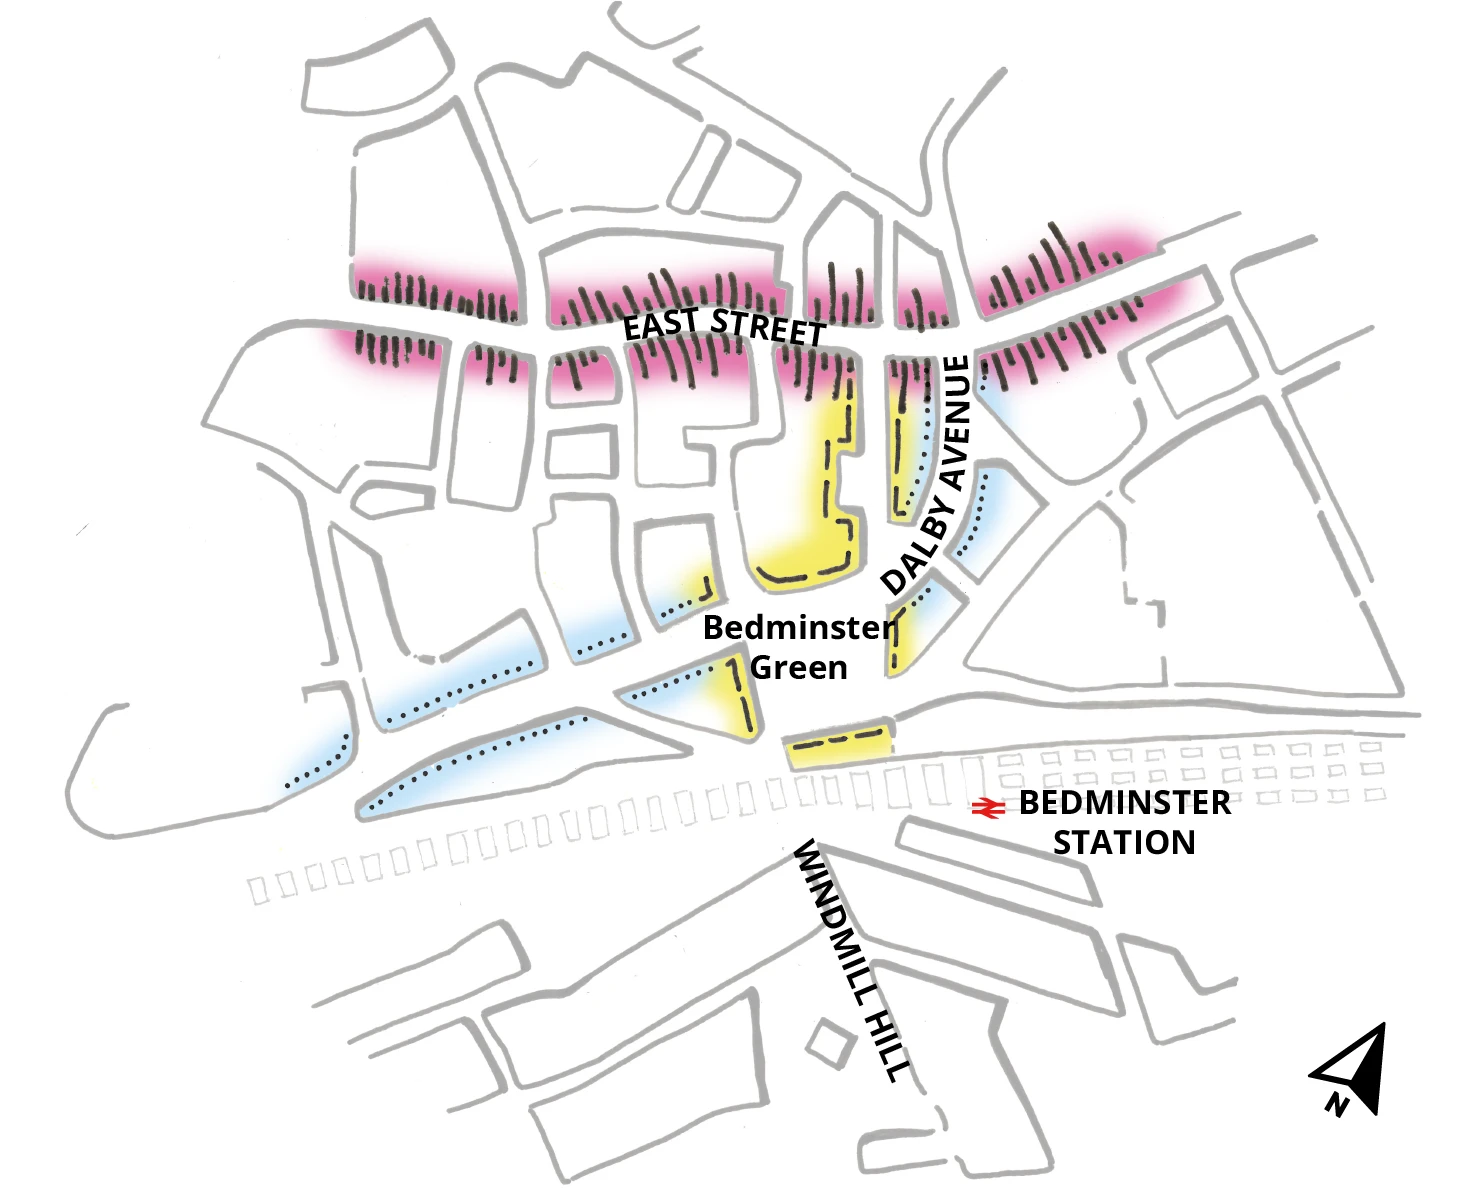 The base of this diagram, which is the same for all the framework diagrams, is a hand drawing showing the urban blocks of the wider Bedminster Green area – East Street is towards the top of the image, Dalby Avenue is in the middle, the railway and Bedminster station is below that and Windmill Hill is at the bottom. Buildings along East Street are highlighted in pink, buildings along Dalby Avenue are highlighted in blue and buildings around Bedminster Green and St Catherine’s Place are highlighted in yellow.